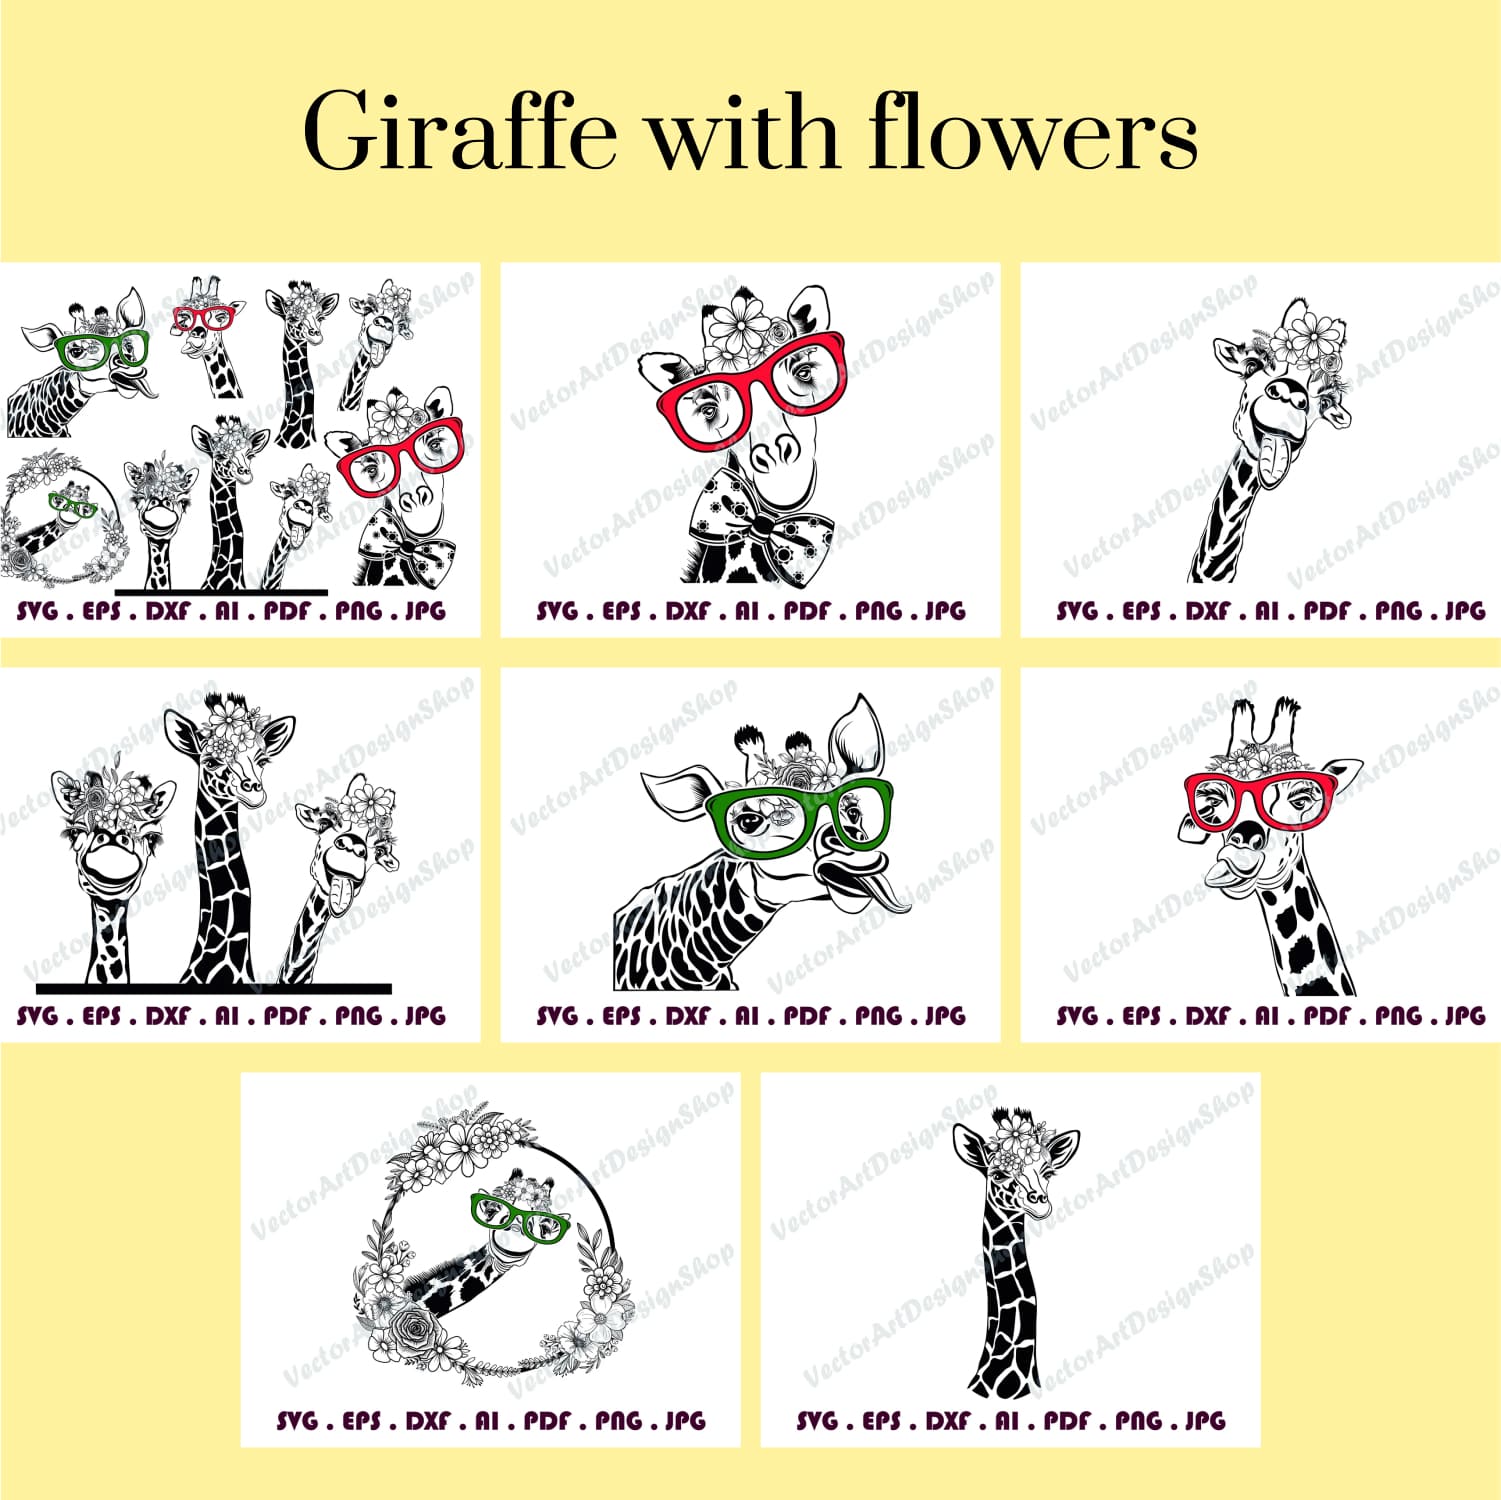 Picture of a giraffe with flowers and glasses.